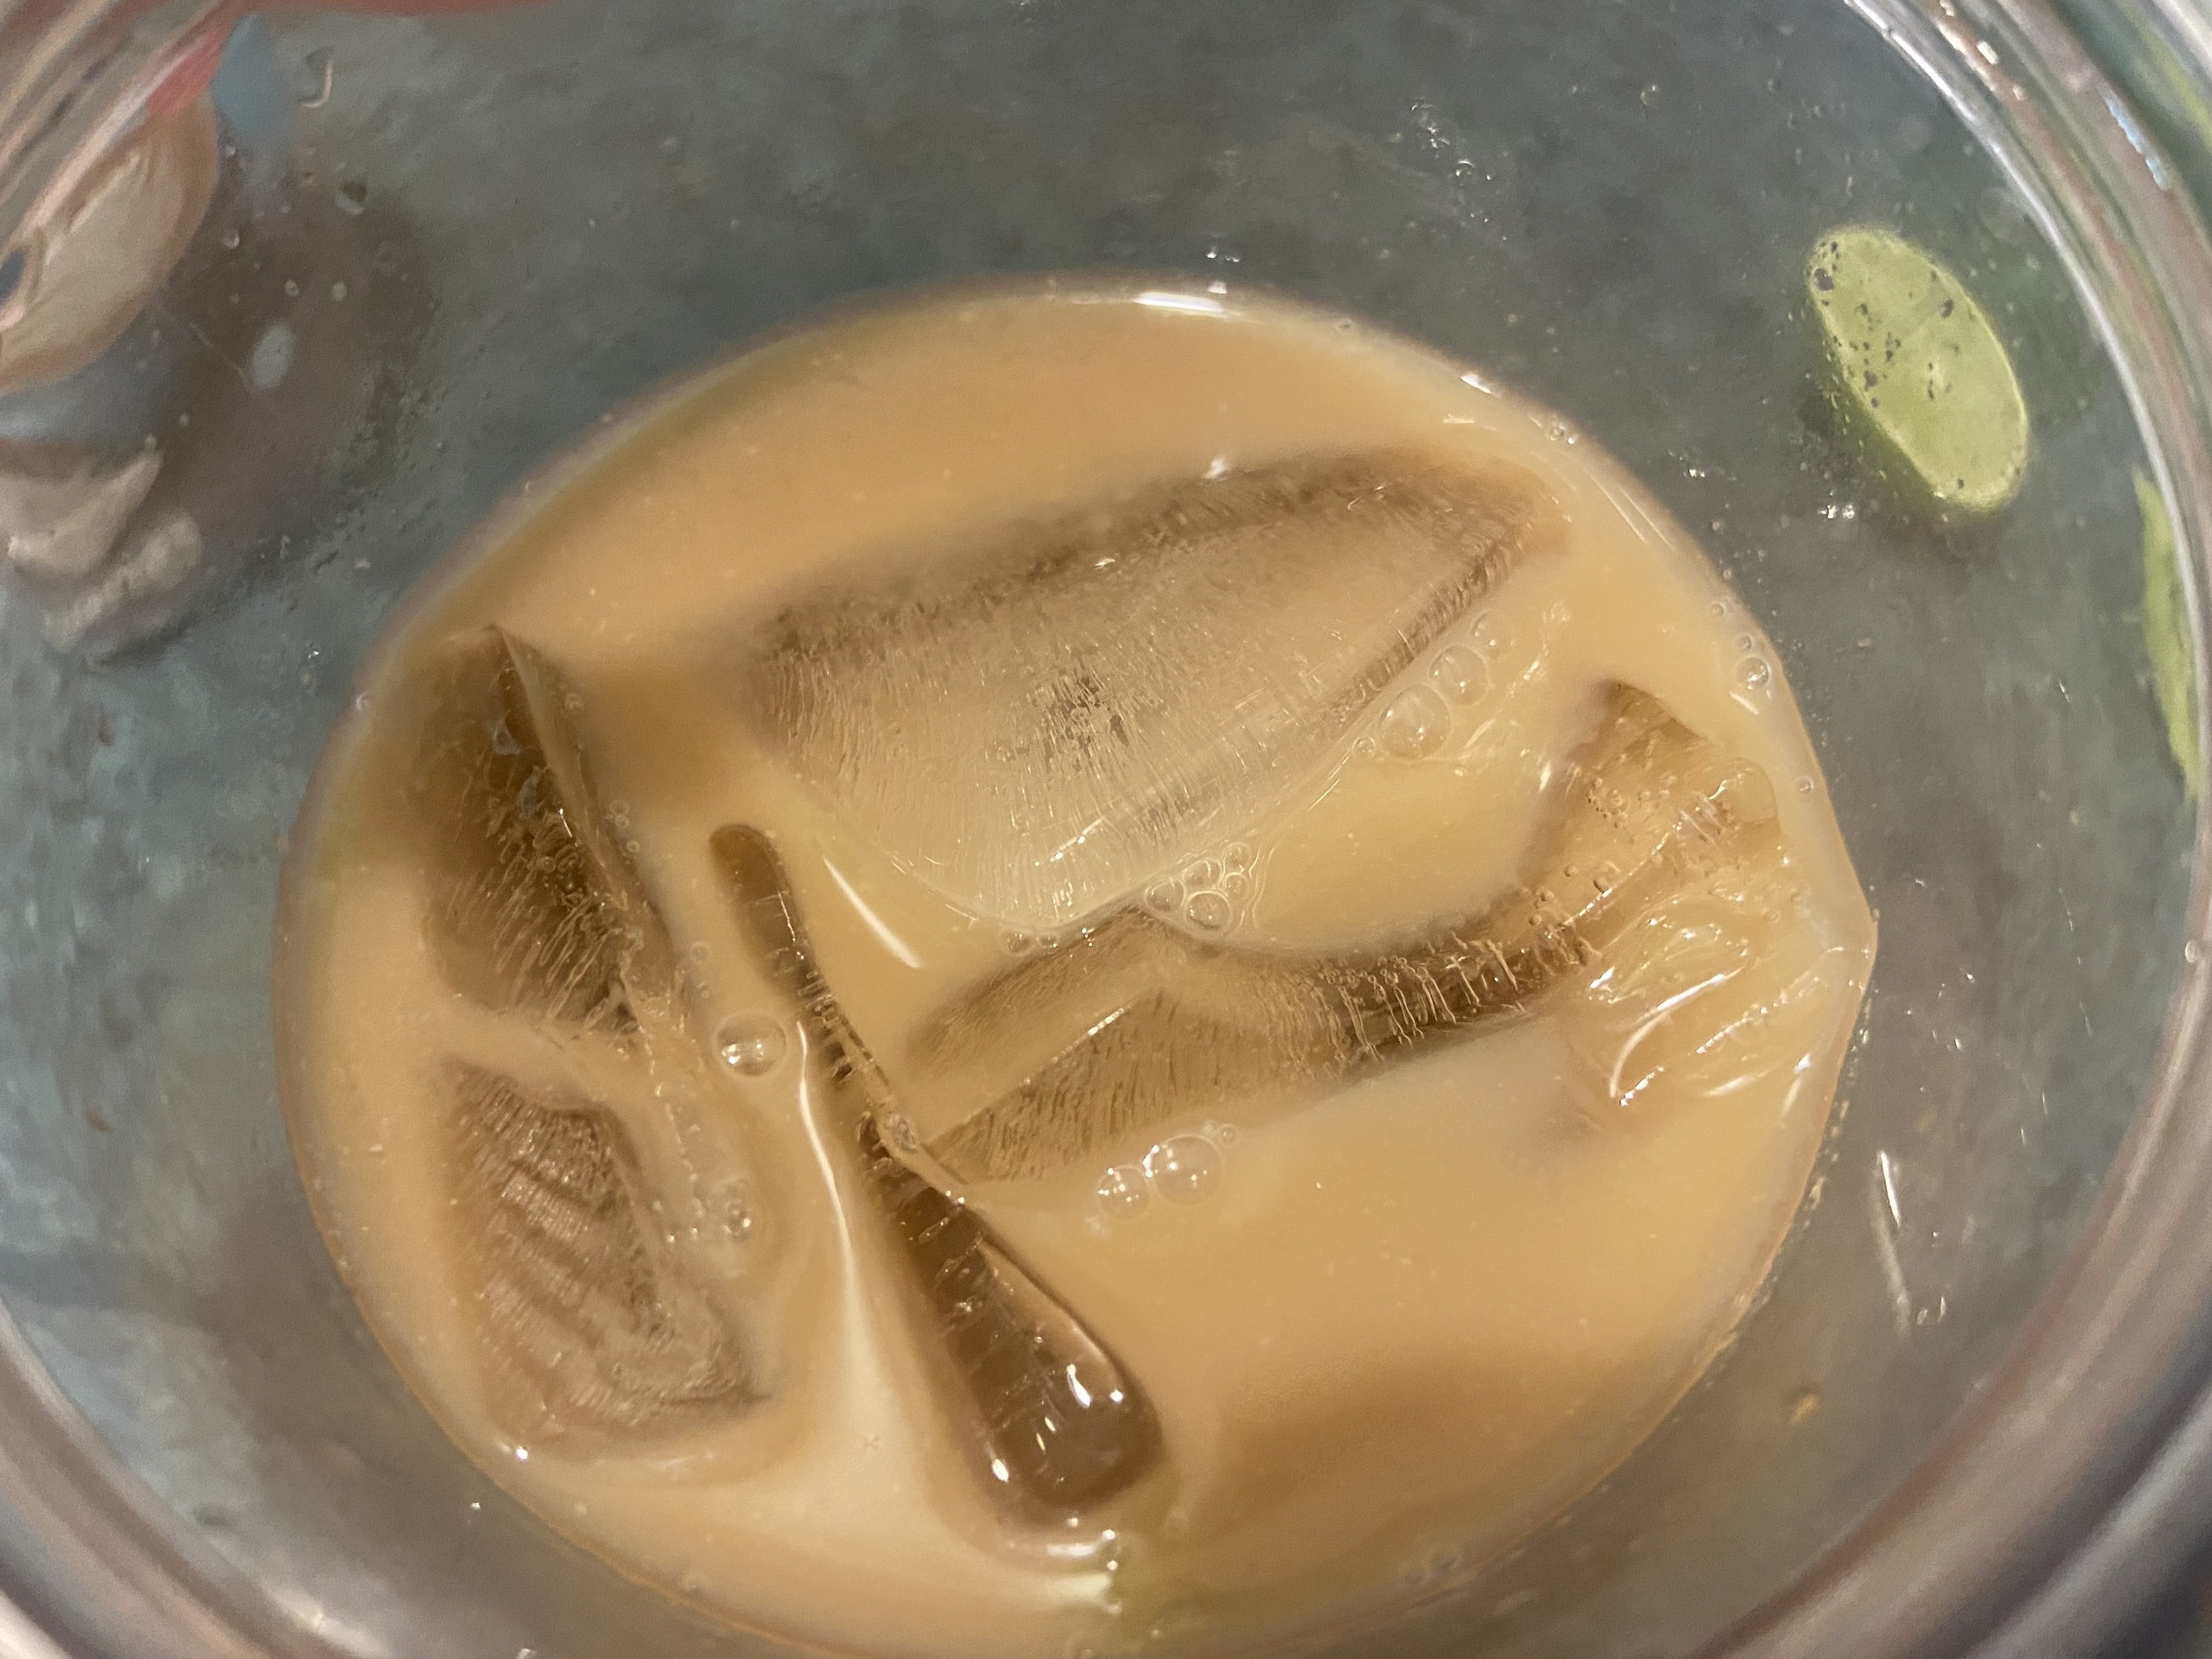 An up-close photo of the glass of diet coke and creamer with ice